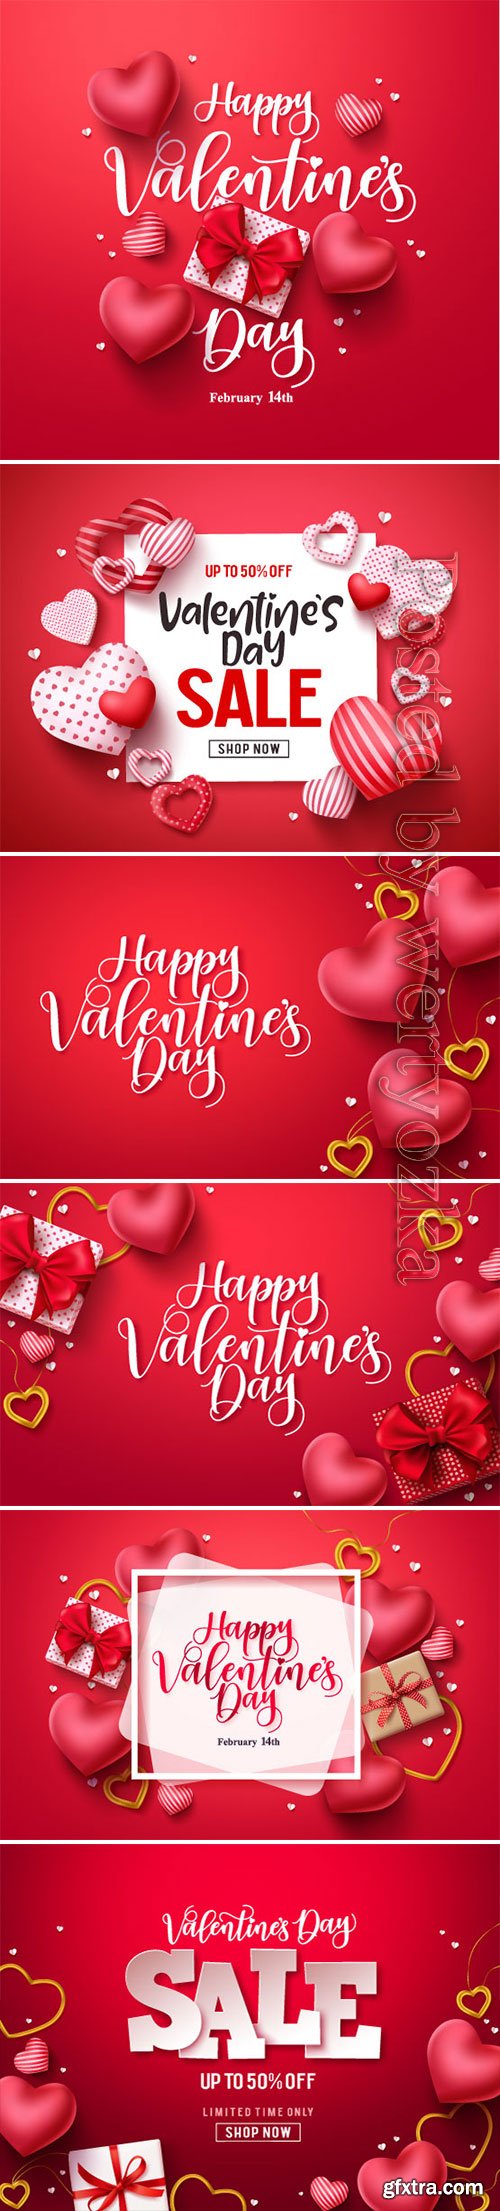 Happy Valentine\'s Day, vector hearts of couples in love